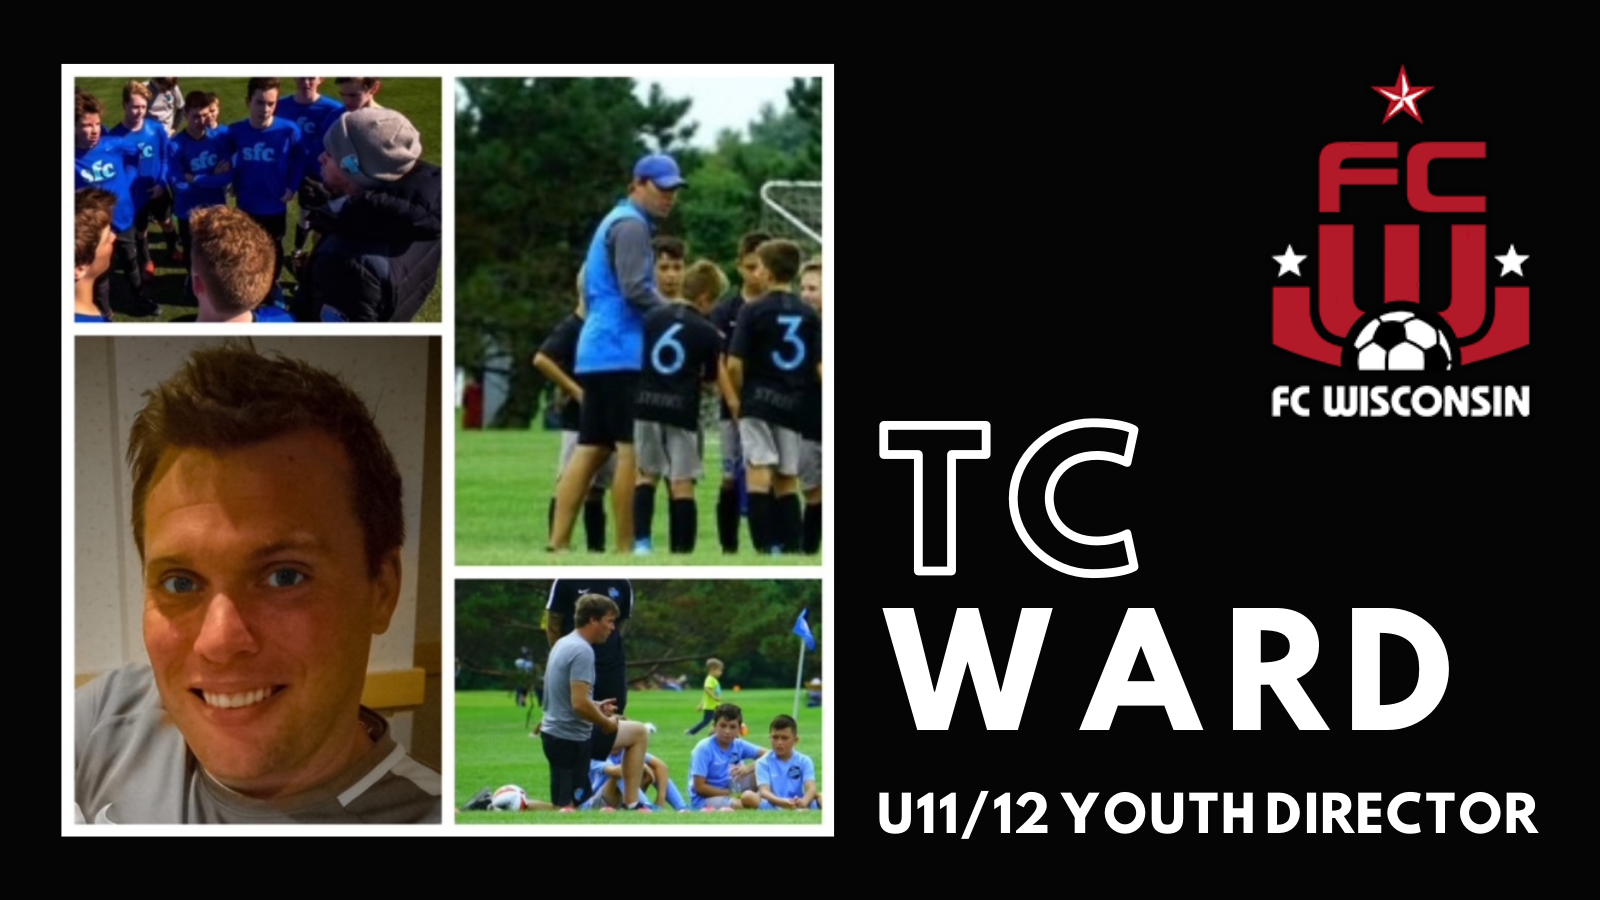 FC Wisconsin Appoints TC Ward U11/12 Youth Director